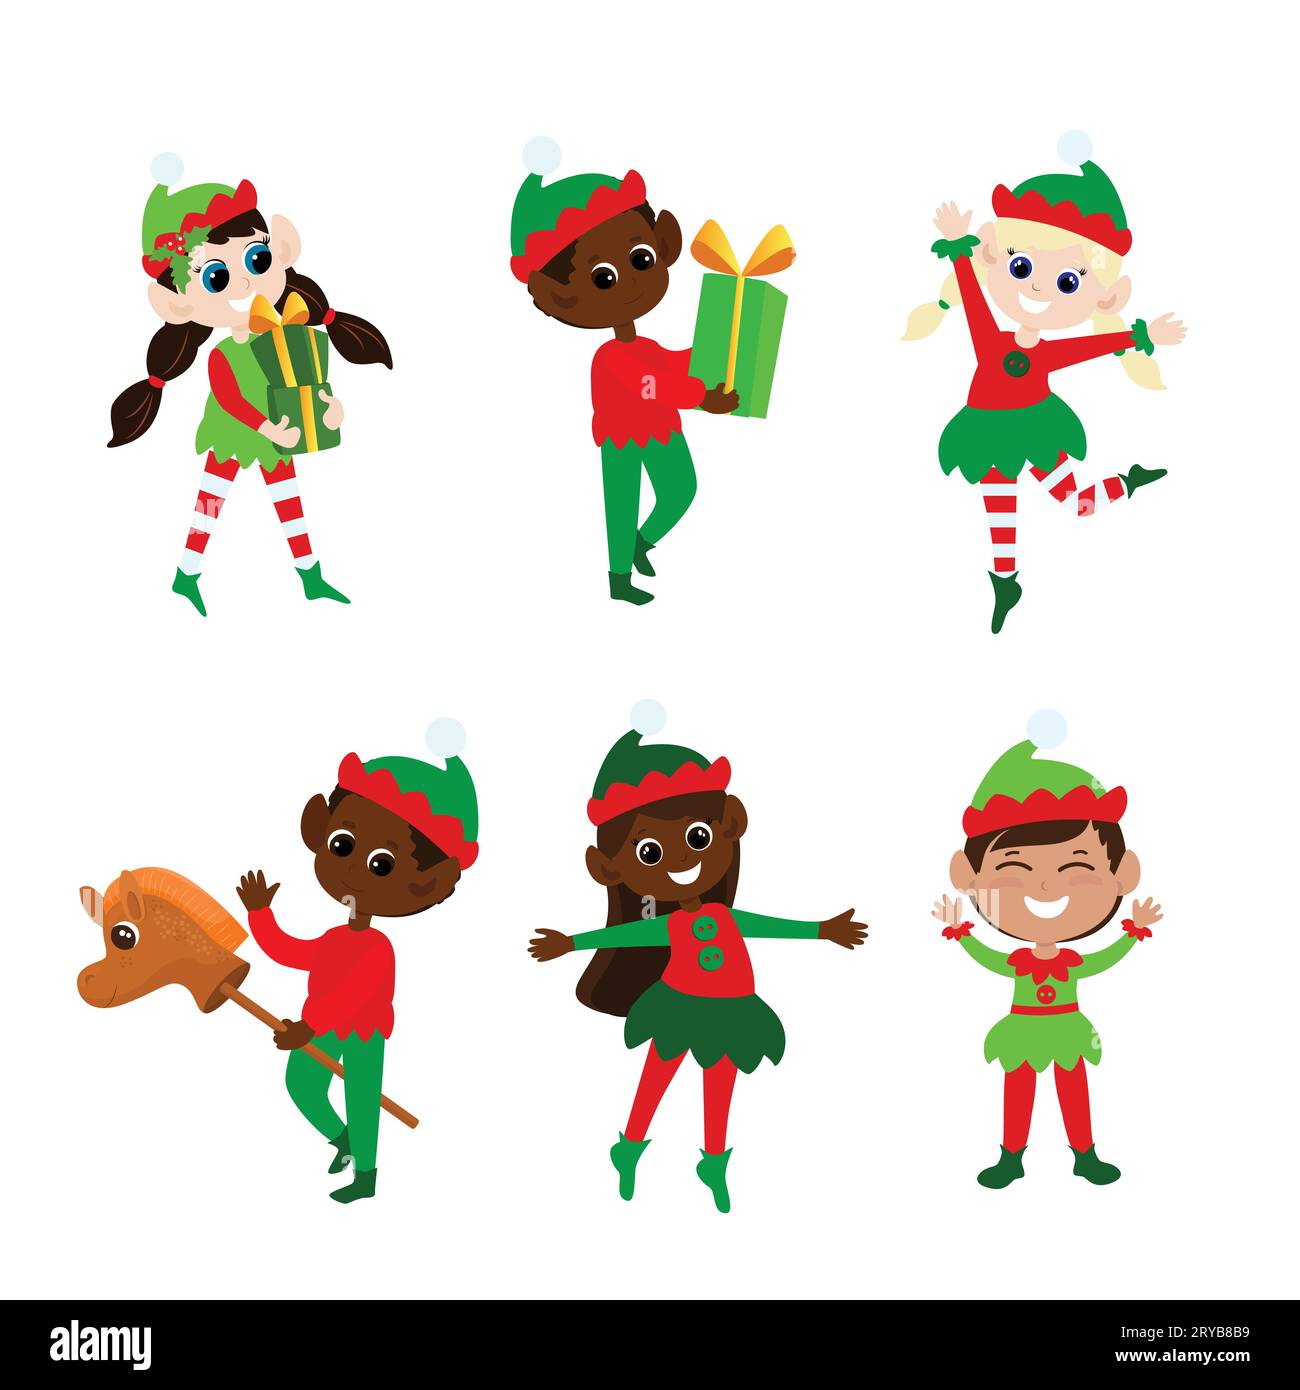 Set Christmas elves. Multicultural boys and girls in traditional elf costumes. They dance, smile, bring gifts,  rides on a wooden horse. Stock Vector